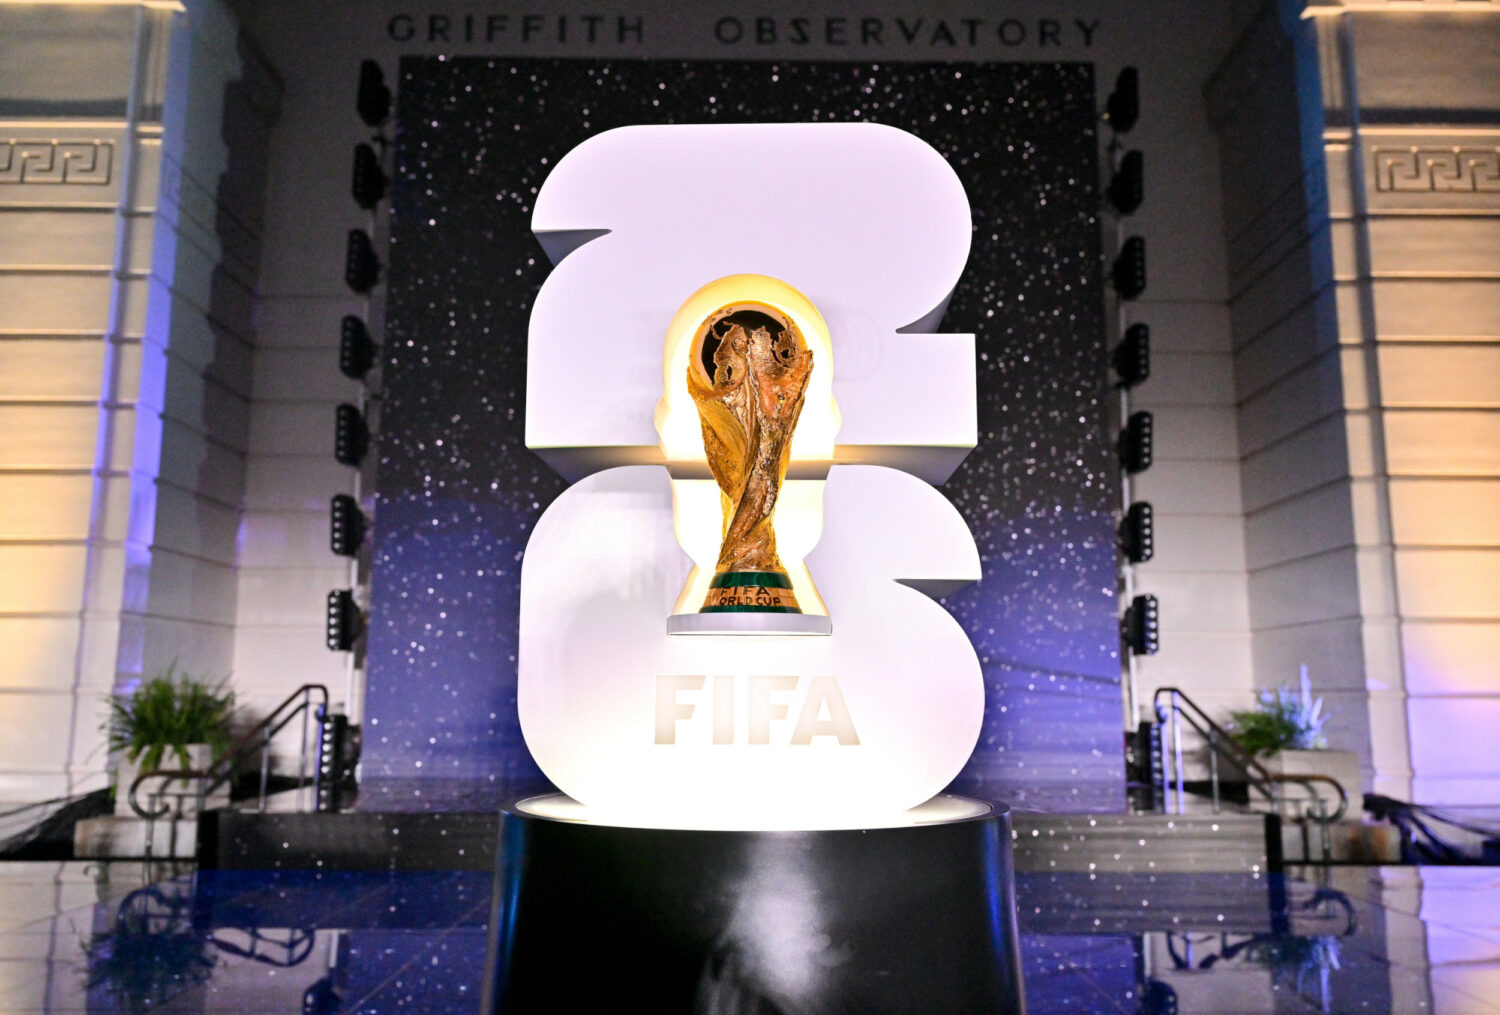 LOS ANGELES, UNITED STATES - MAY 17: A view of the FIFA World Cup Winner's Trophy during the FIFA World Cup 26 Official Brand Launch at the Griffith Observatory on May 17, 2023 in Los Angeles, United States. (Photo by Harold Cunningham/FIFA), Quelle: FIFA